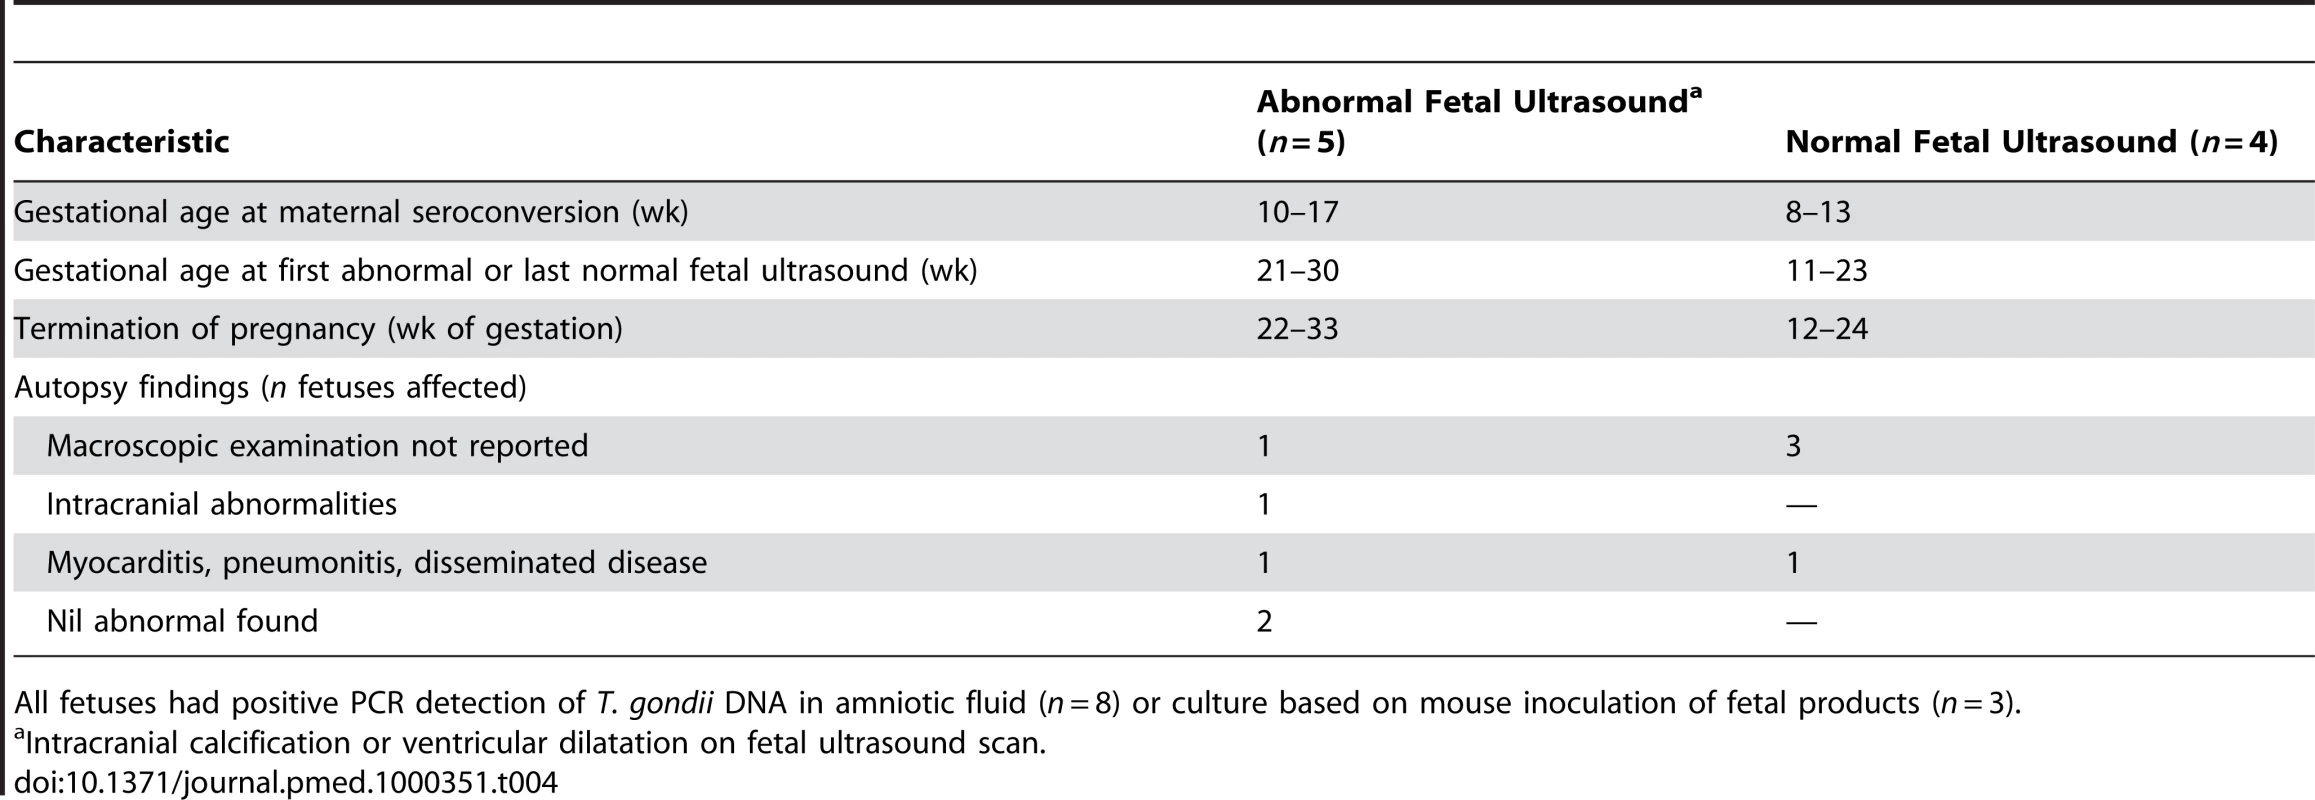 Characteristics of fetuses terminated with congenital toxoplasmosis.